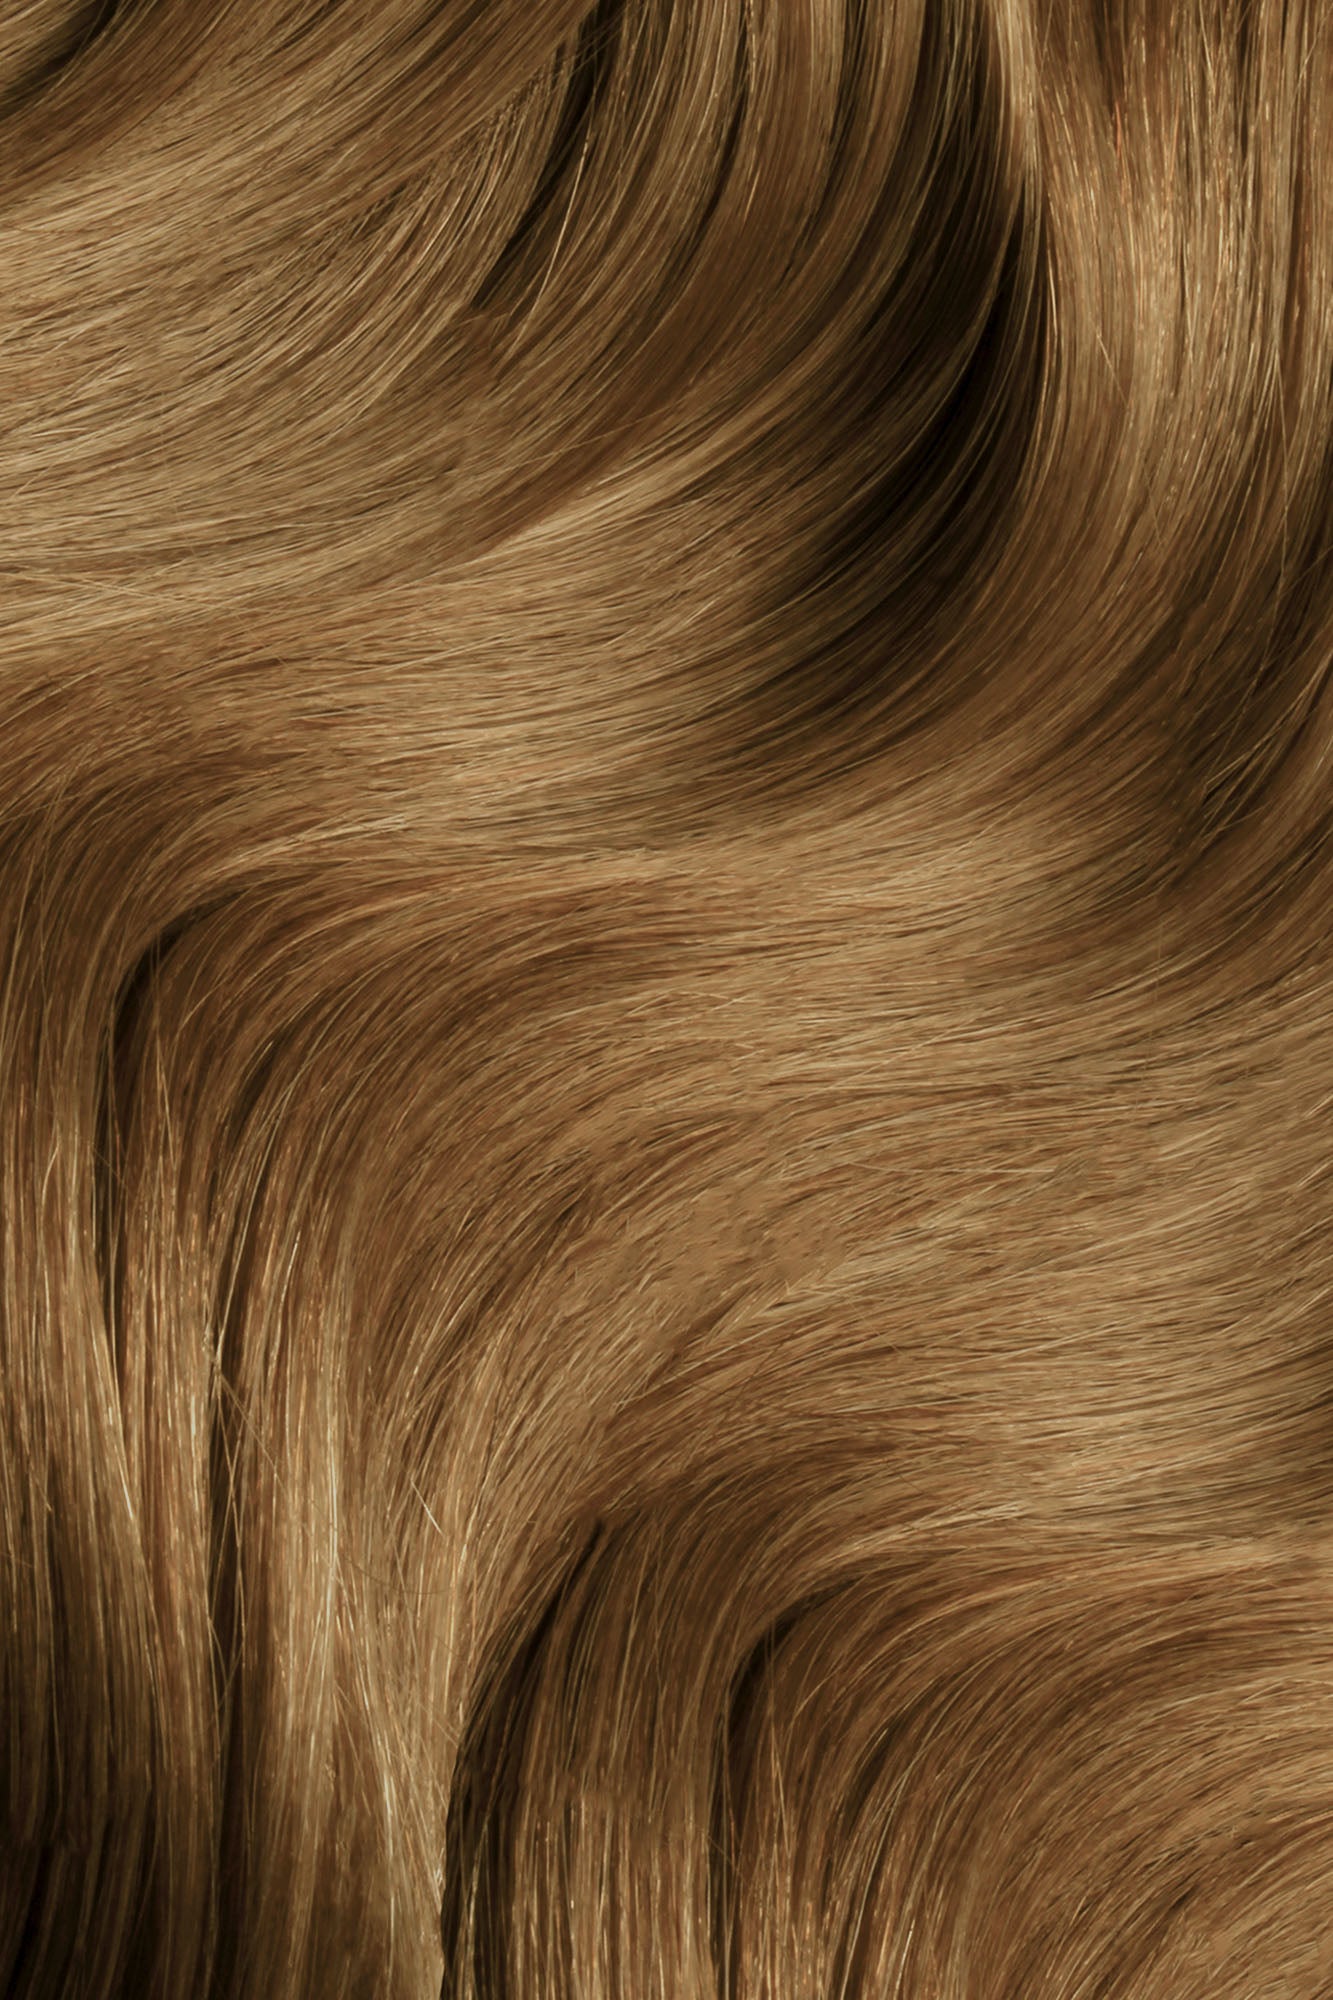 Nano Bonds 24 Inches - SWAY Hair Extensions Blondette-4-27 Ultra-fine, invisible bonds for a flawless, natural look. 100% Remy Human hair, lightweight and versatile. Reusable and perfect for individual or salon use.